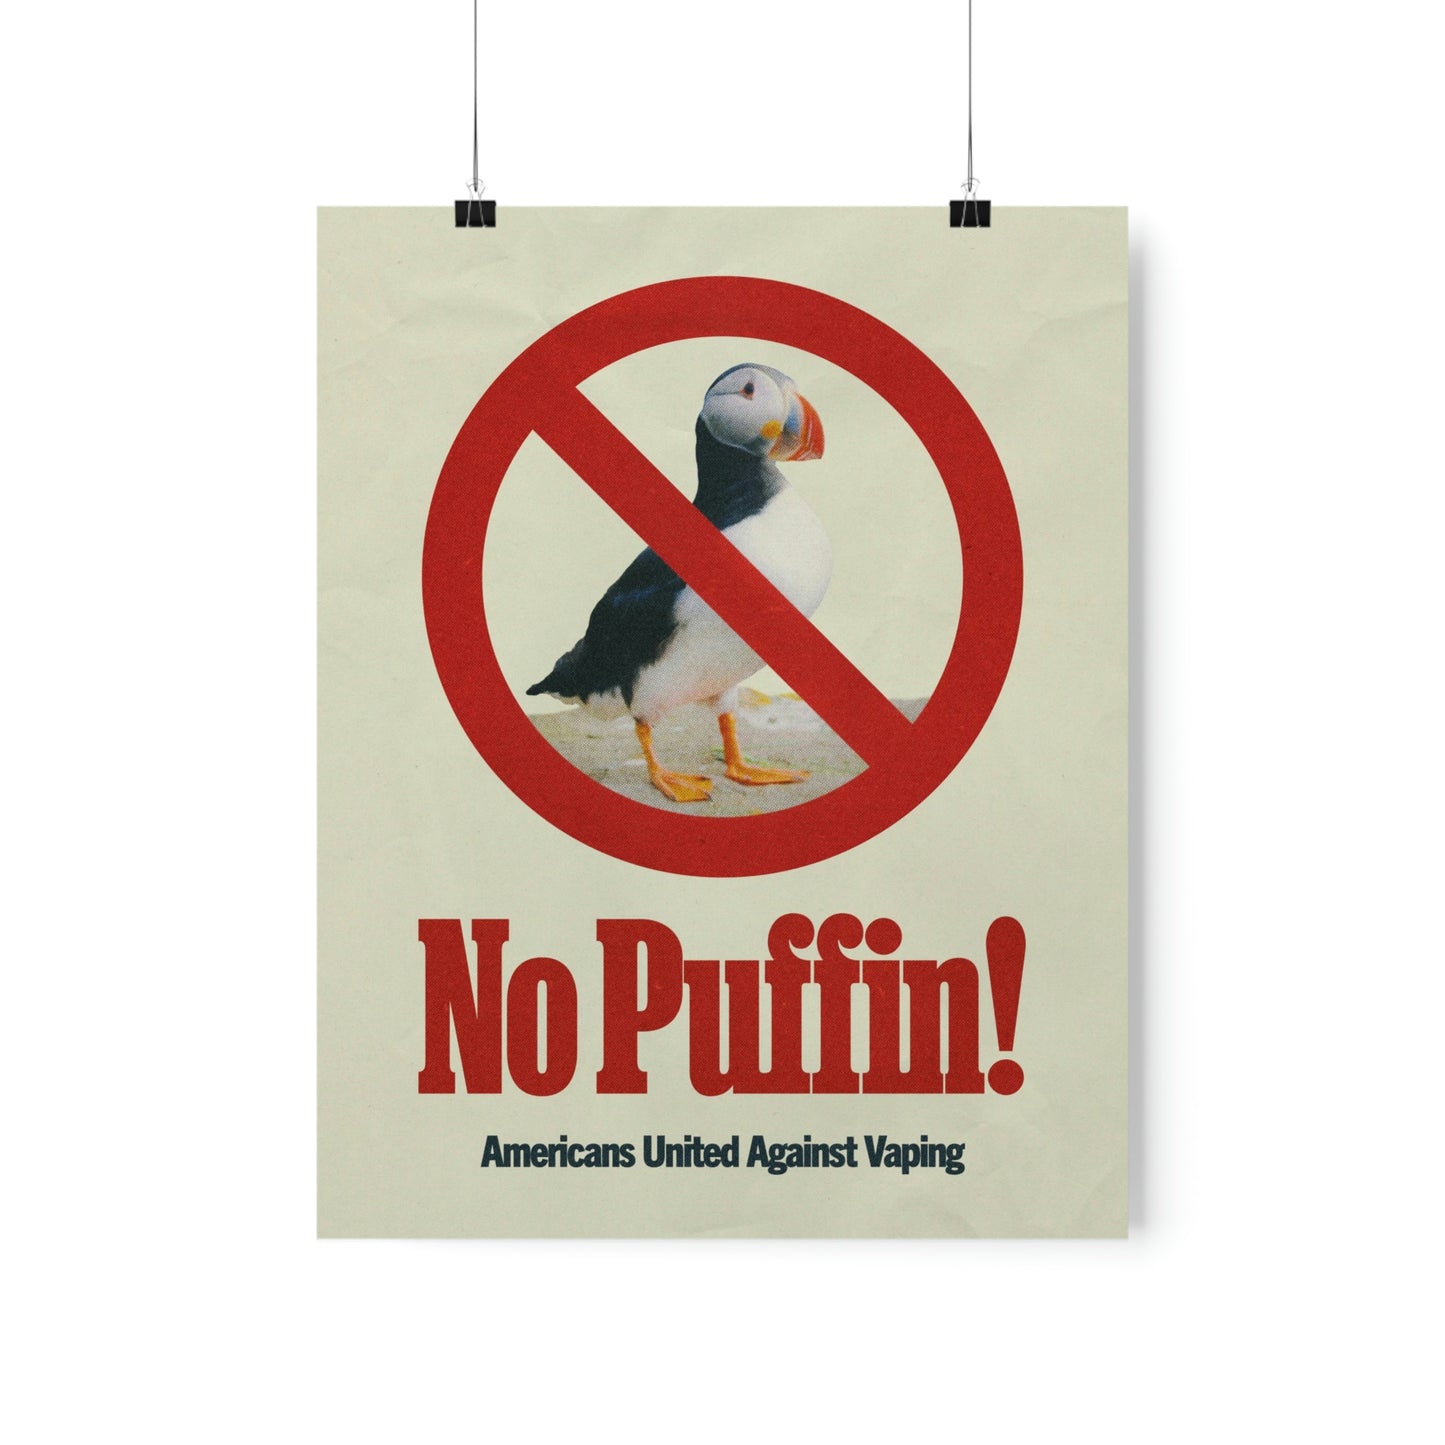 No Puffin!